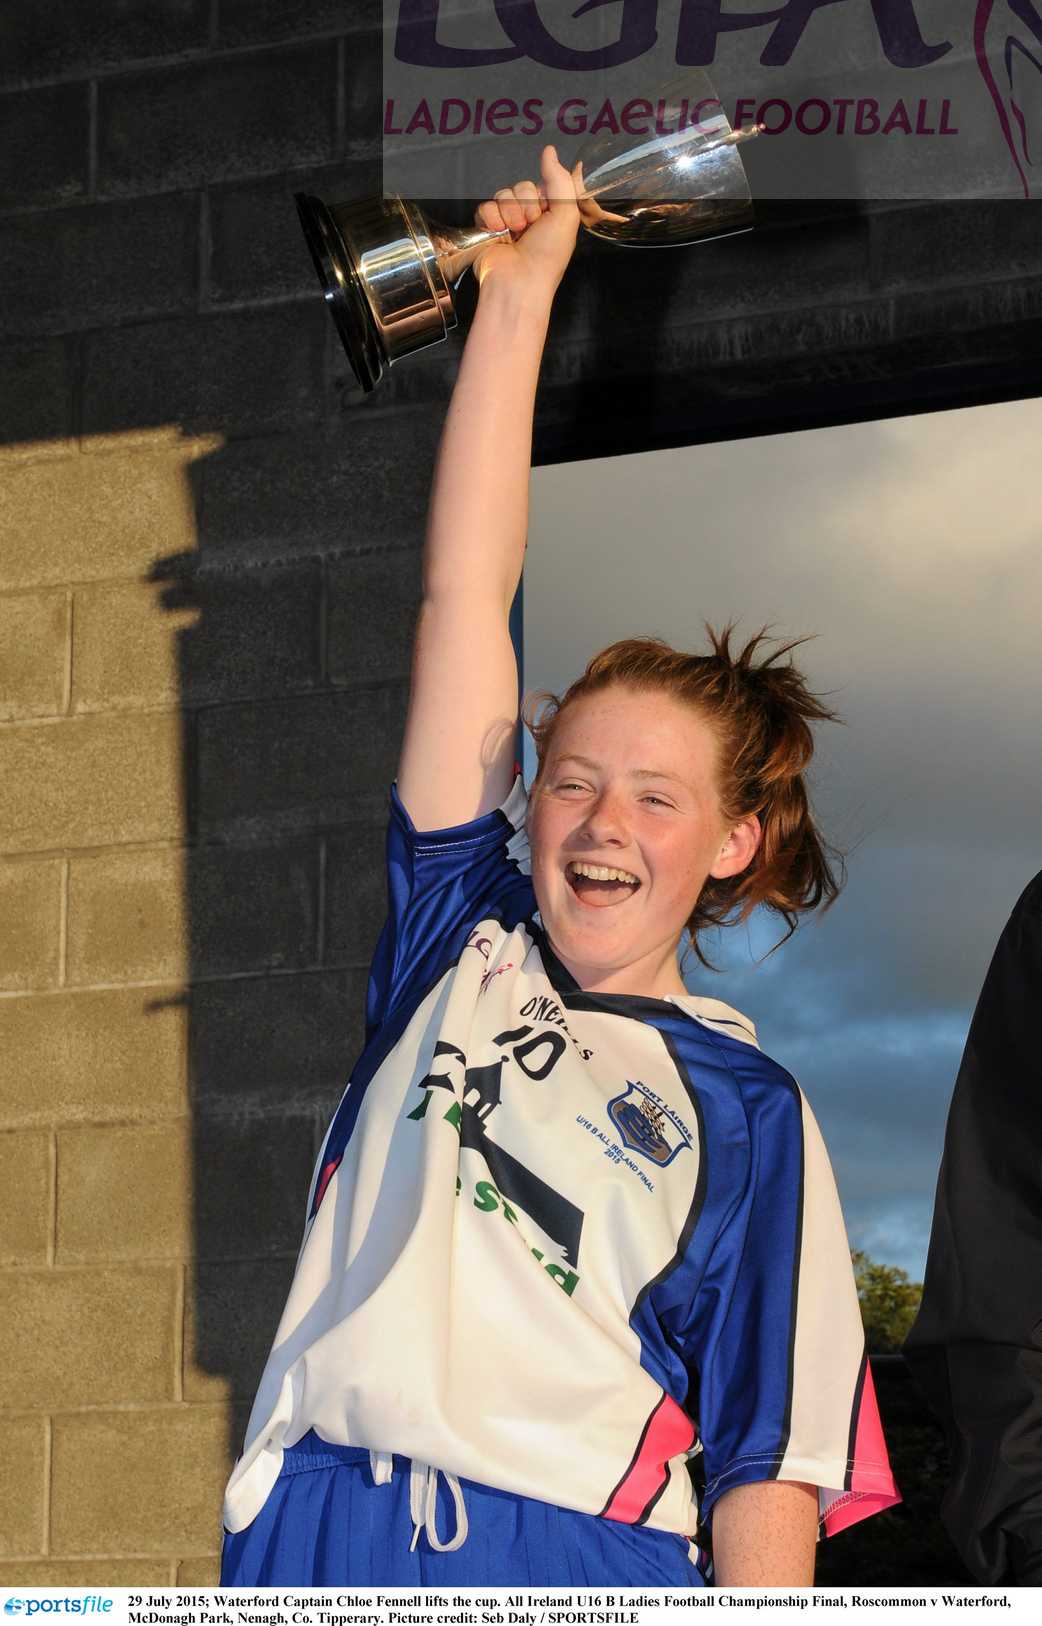 29 July 2015; Waterford Captain Chloe Fennell lifts the cup. All Ireland U16 B Ladies Football Championship Final, Roscommon v Waterford, McDonagh Park, Nenagh, Co. Tipperary. Picture credit: Seb Daly / SPORTSFILE